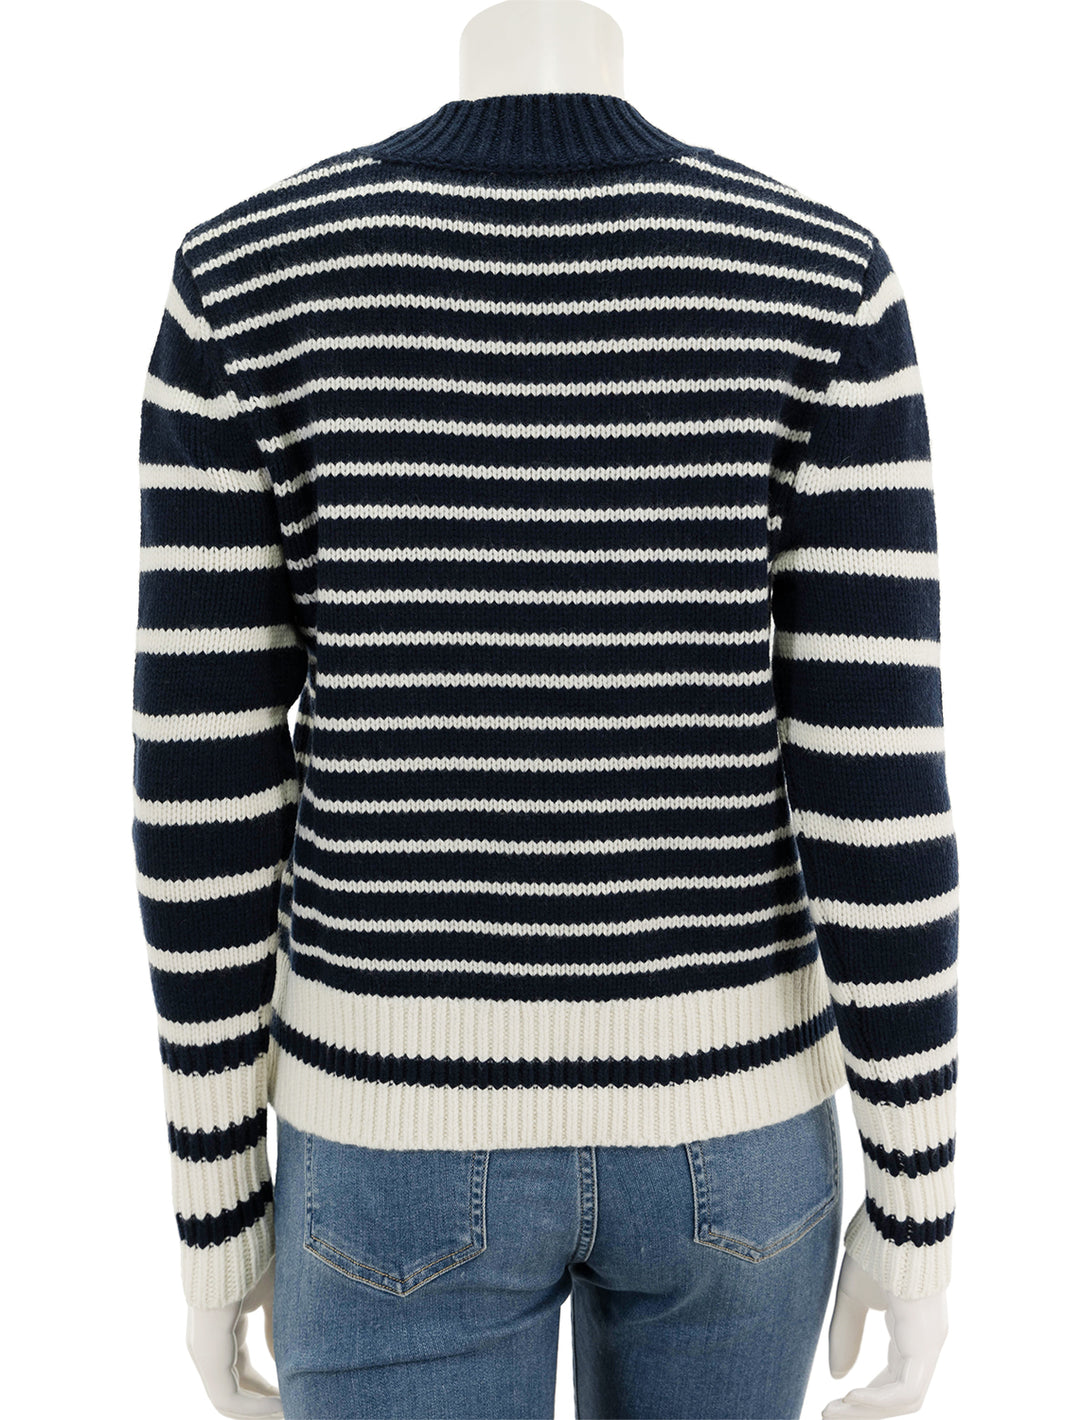 Back view of KULE's the brandy in navy and white stripe.